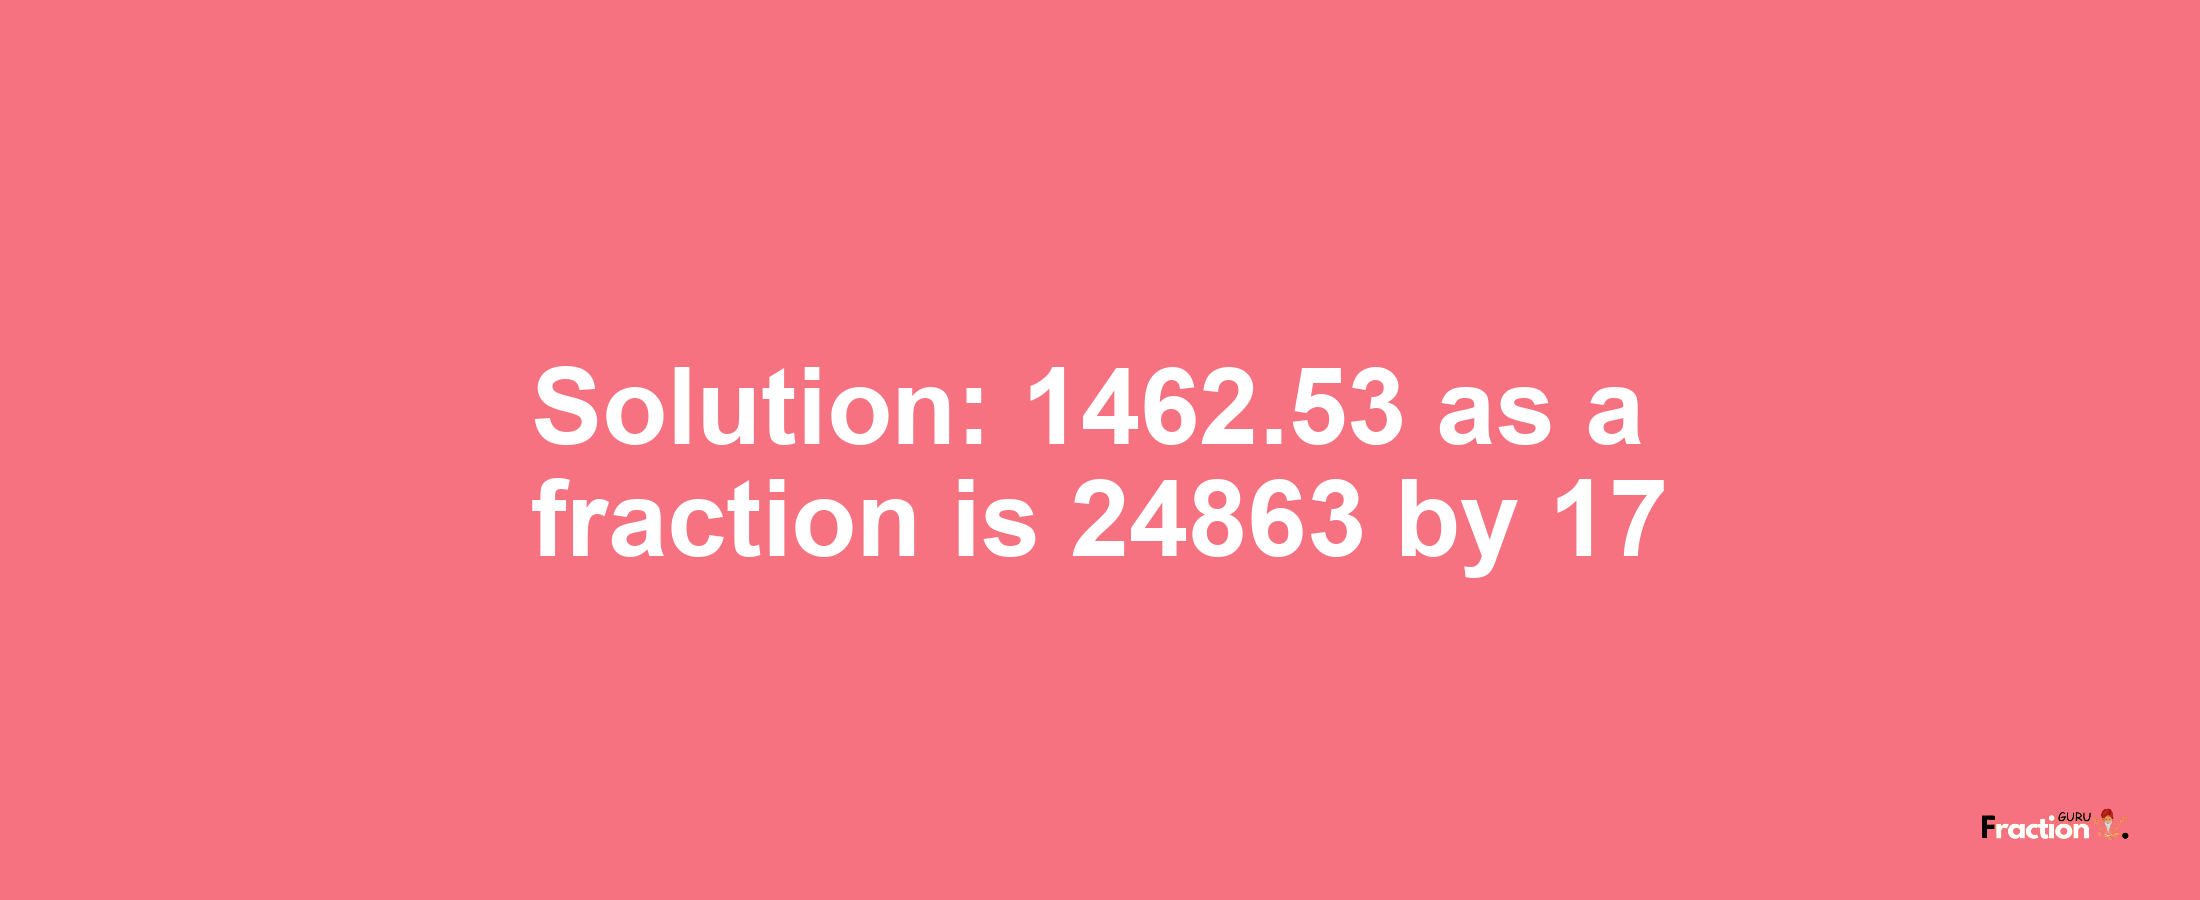 Solution:1462.53 as a fraction is 24863/17